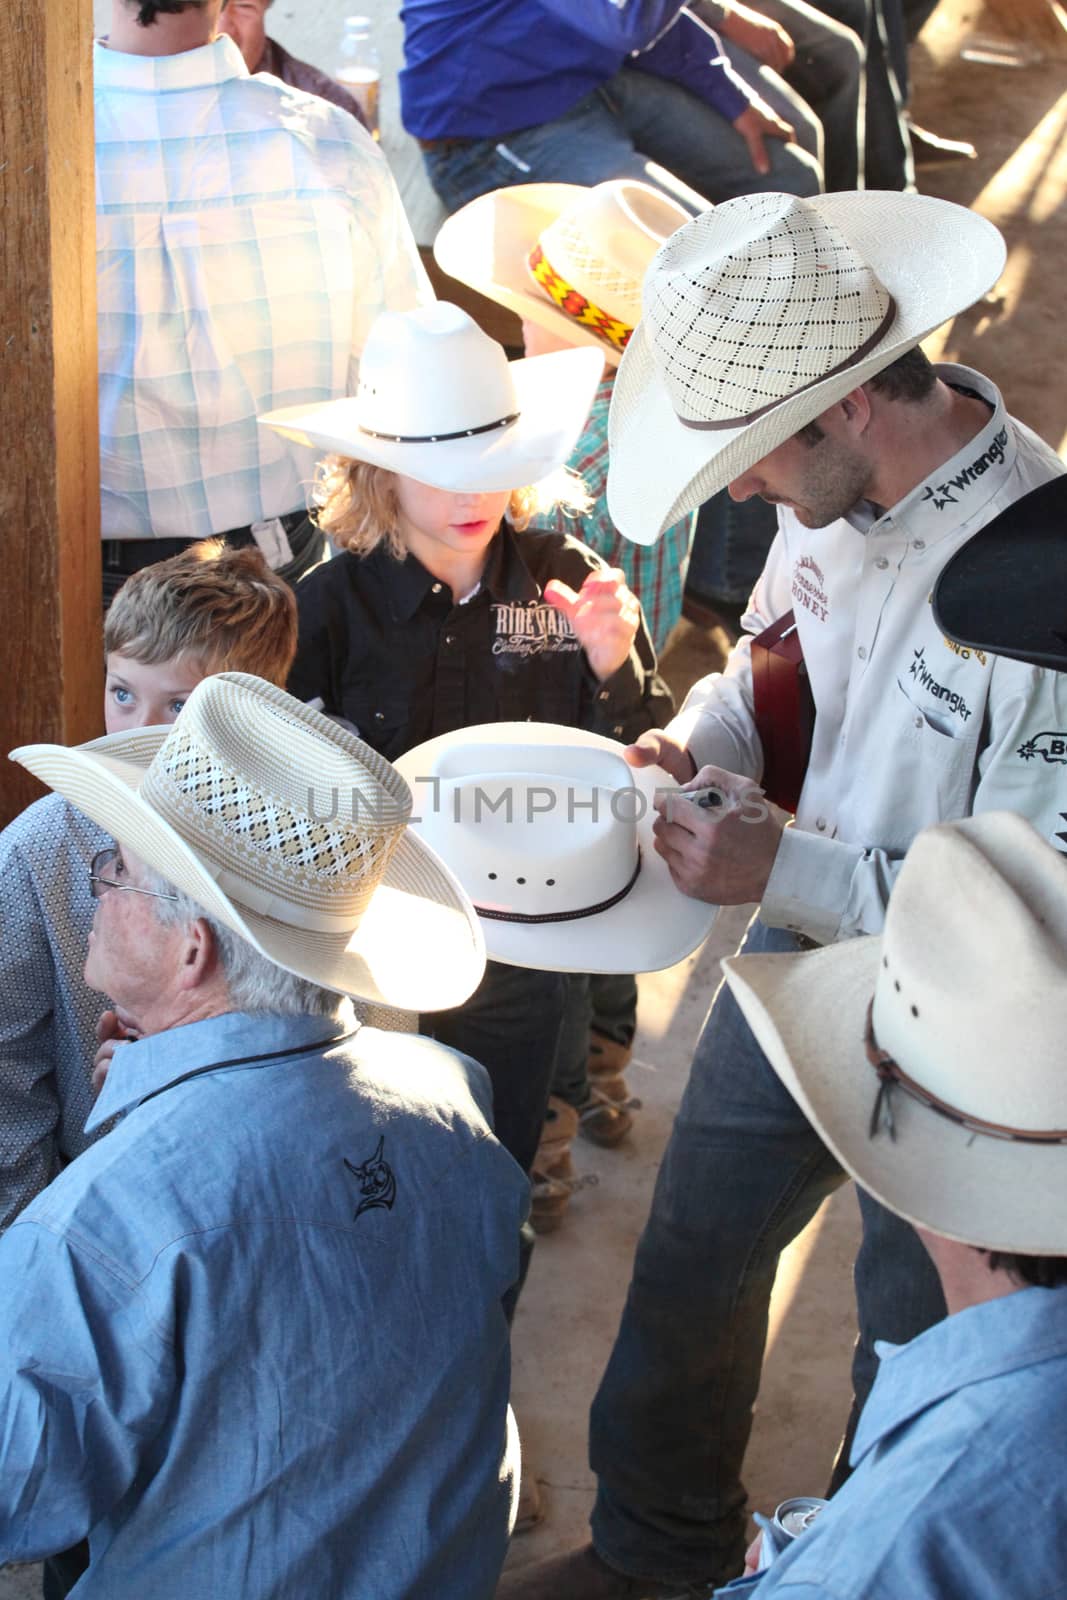 MERRITT; B.C. CANADA - May 30; 2015: Fans receiving autographs at The 3rd Annual Ty Pozzobon Invitational PBR Event.